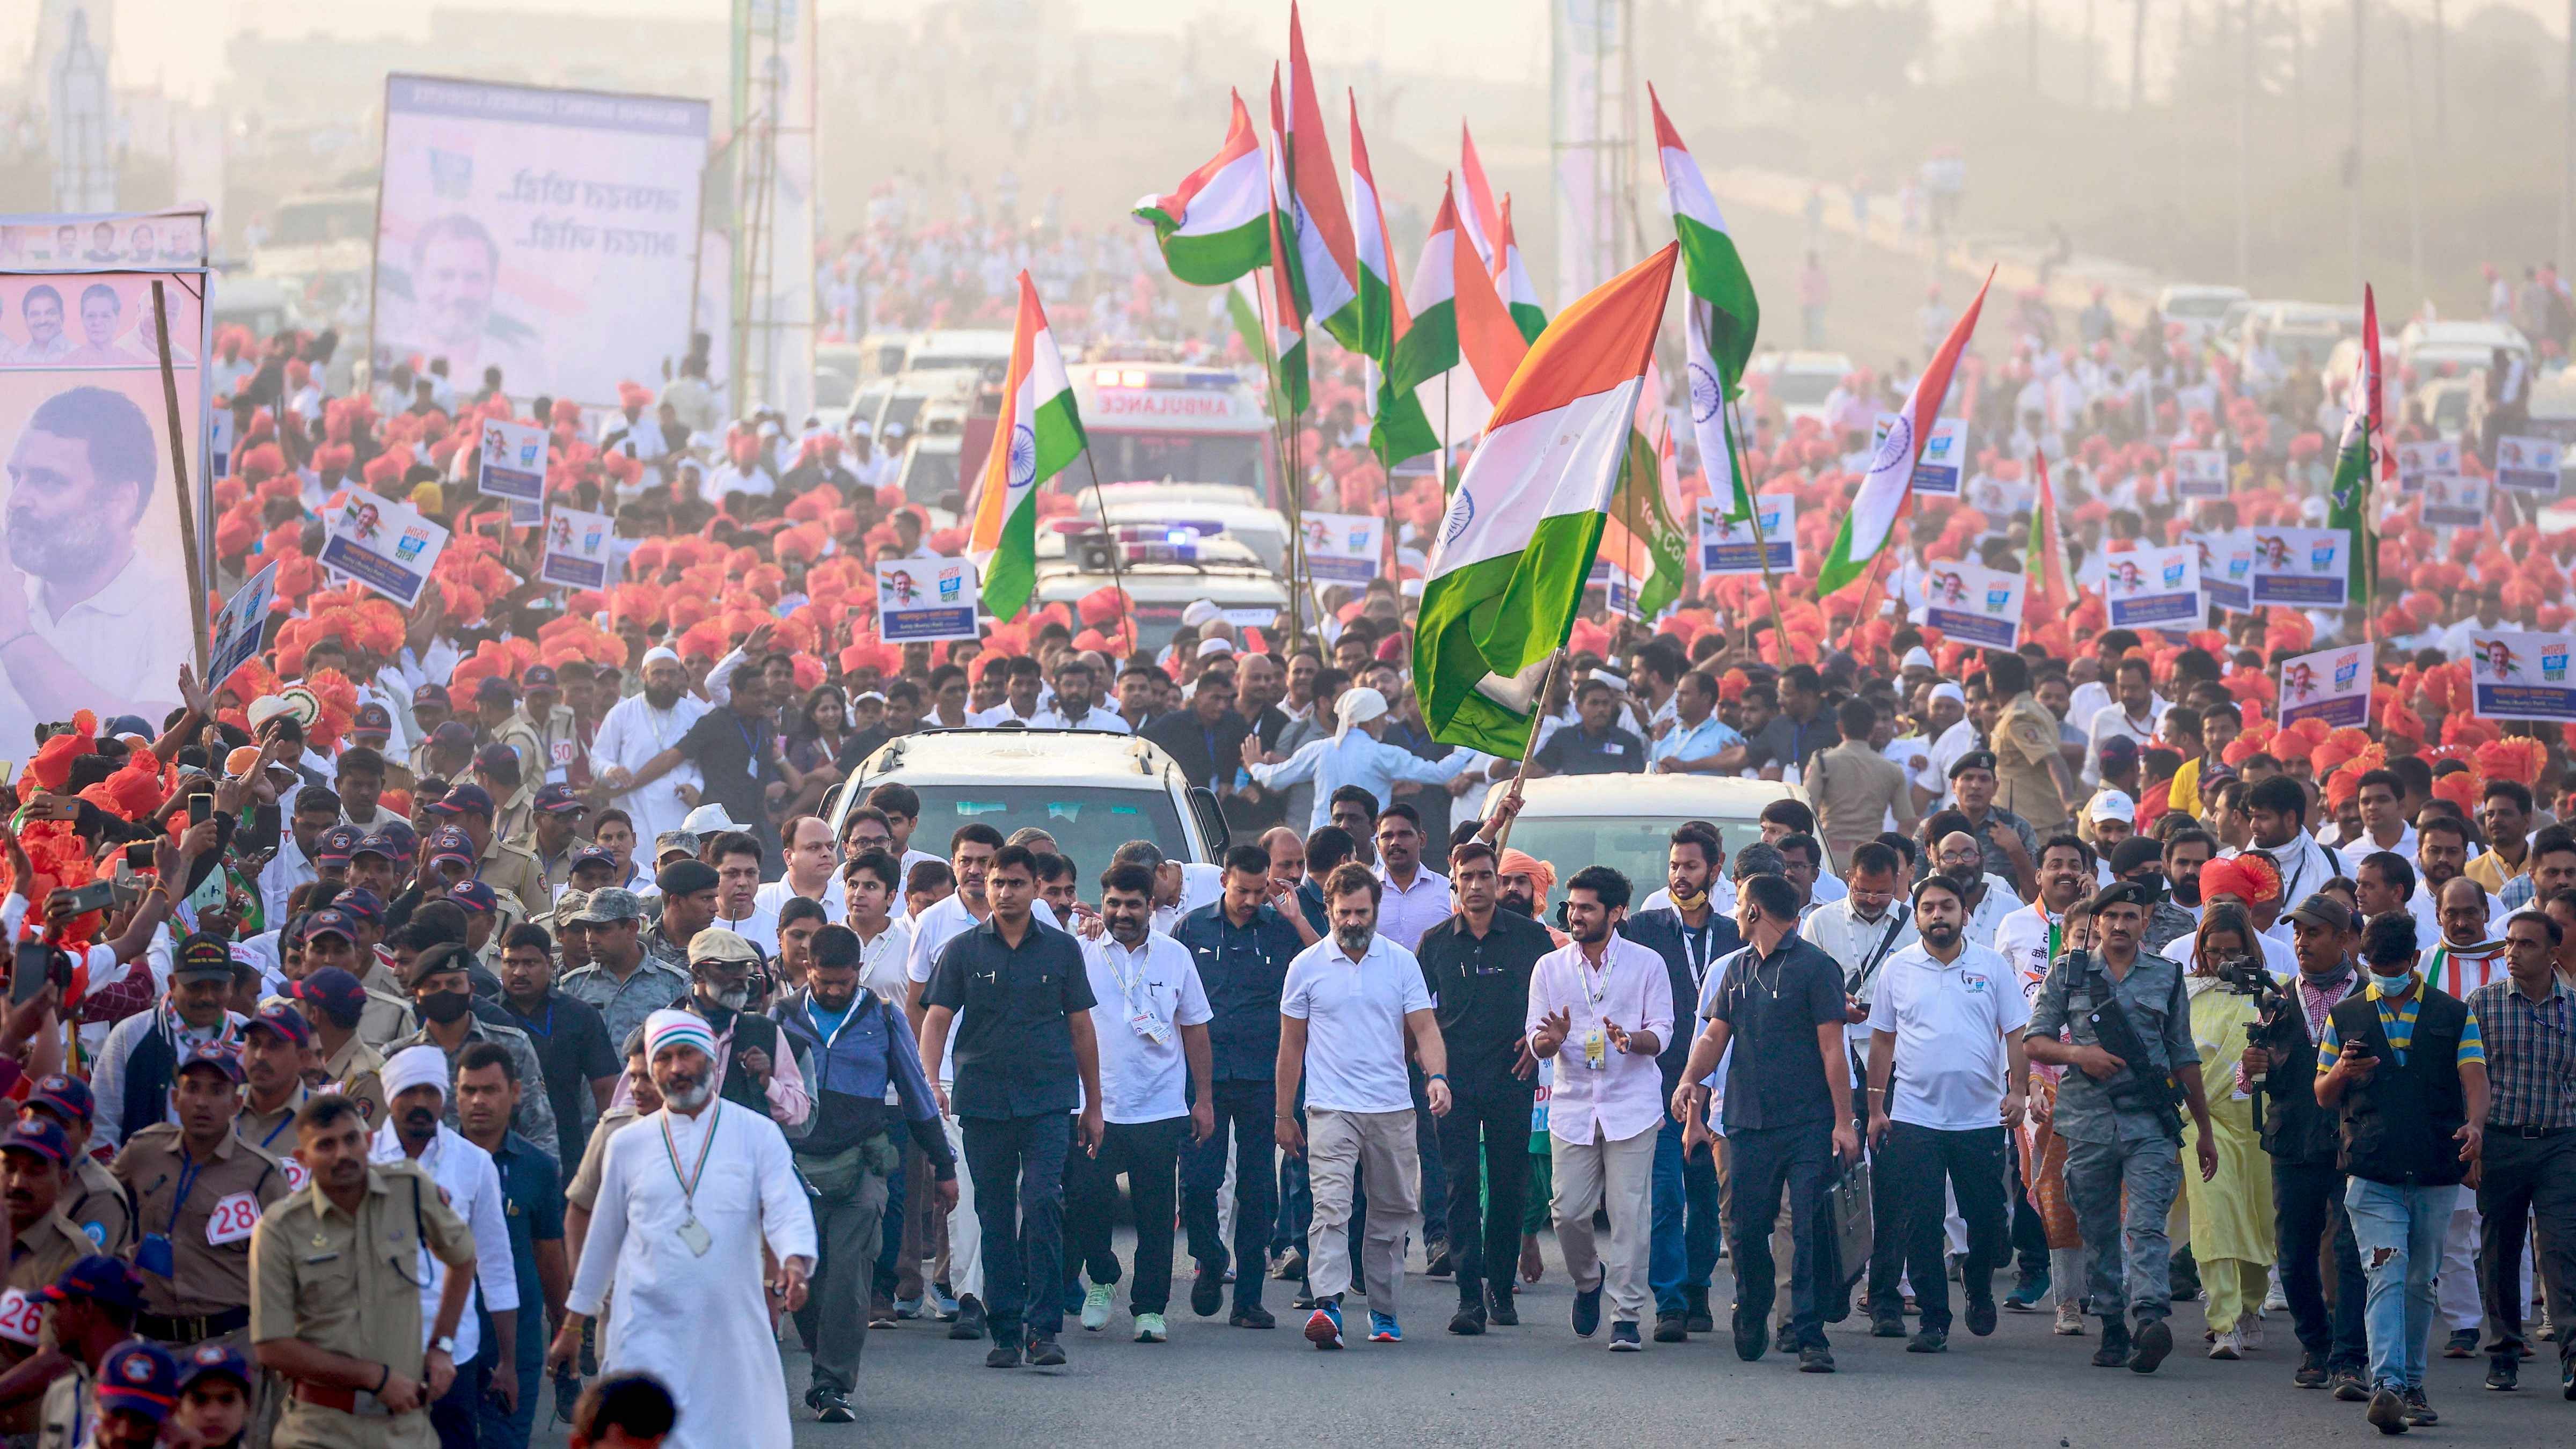 Congress leader Rahul Gandhi with supporters during the party's 'Bharat Jodo Yatra', in Hingoli. Credit: PTI Photo